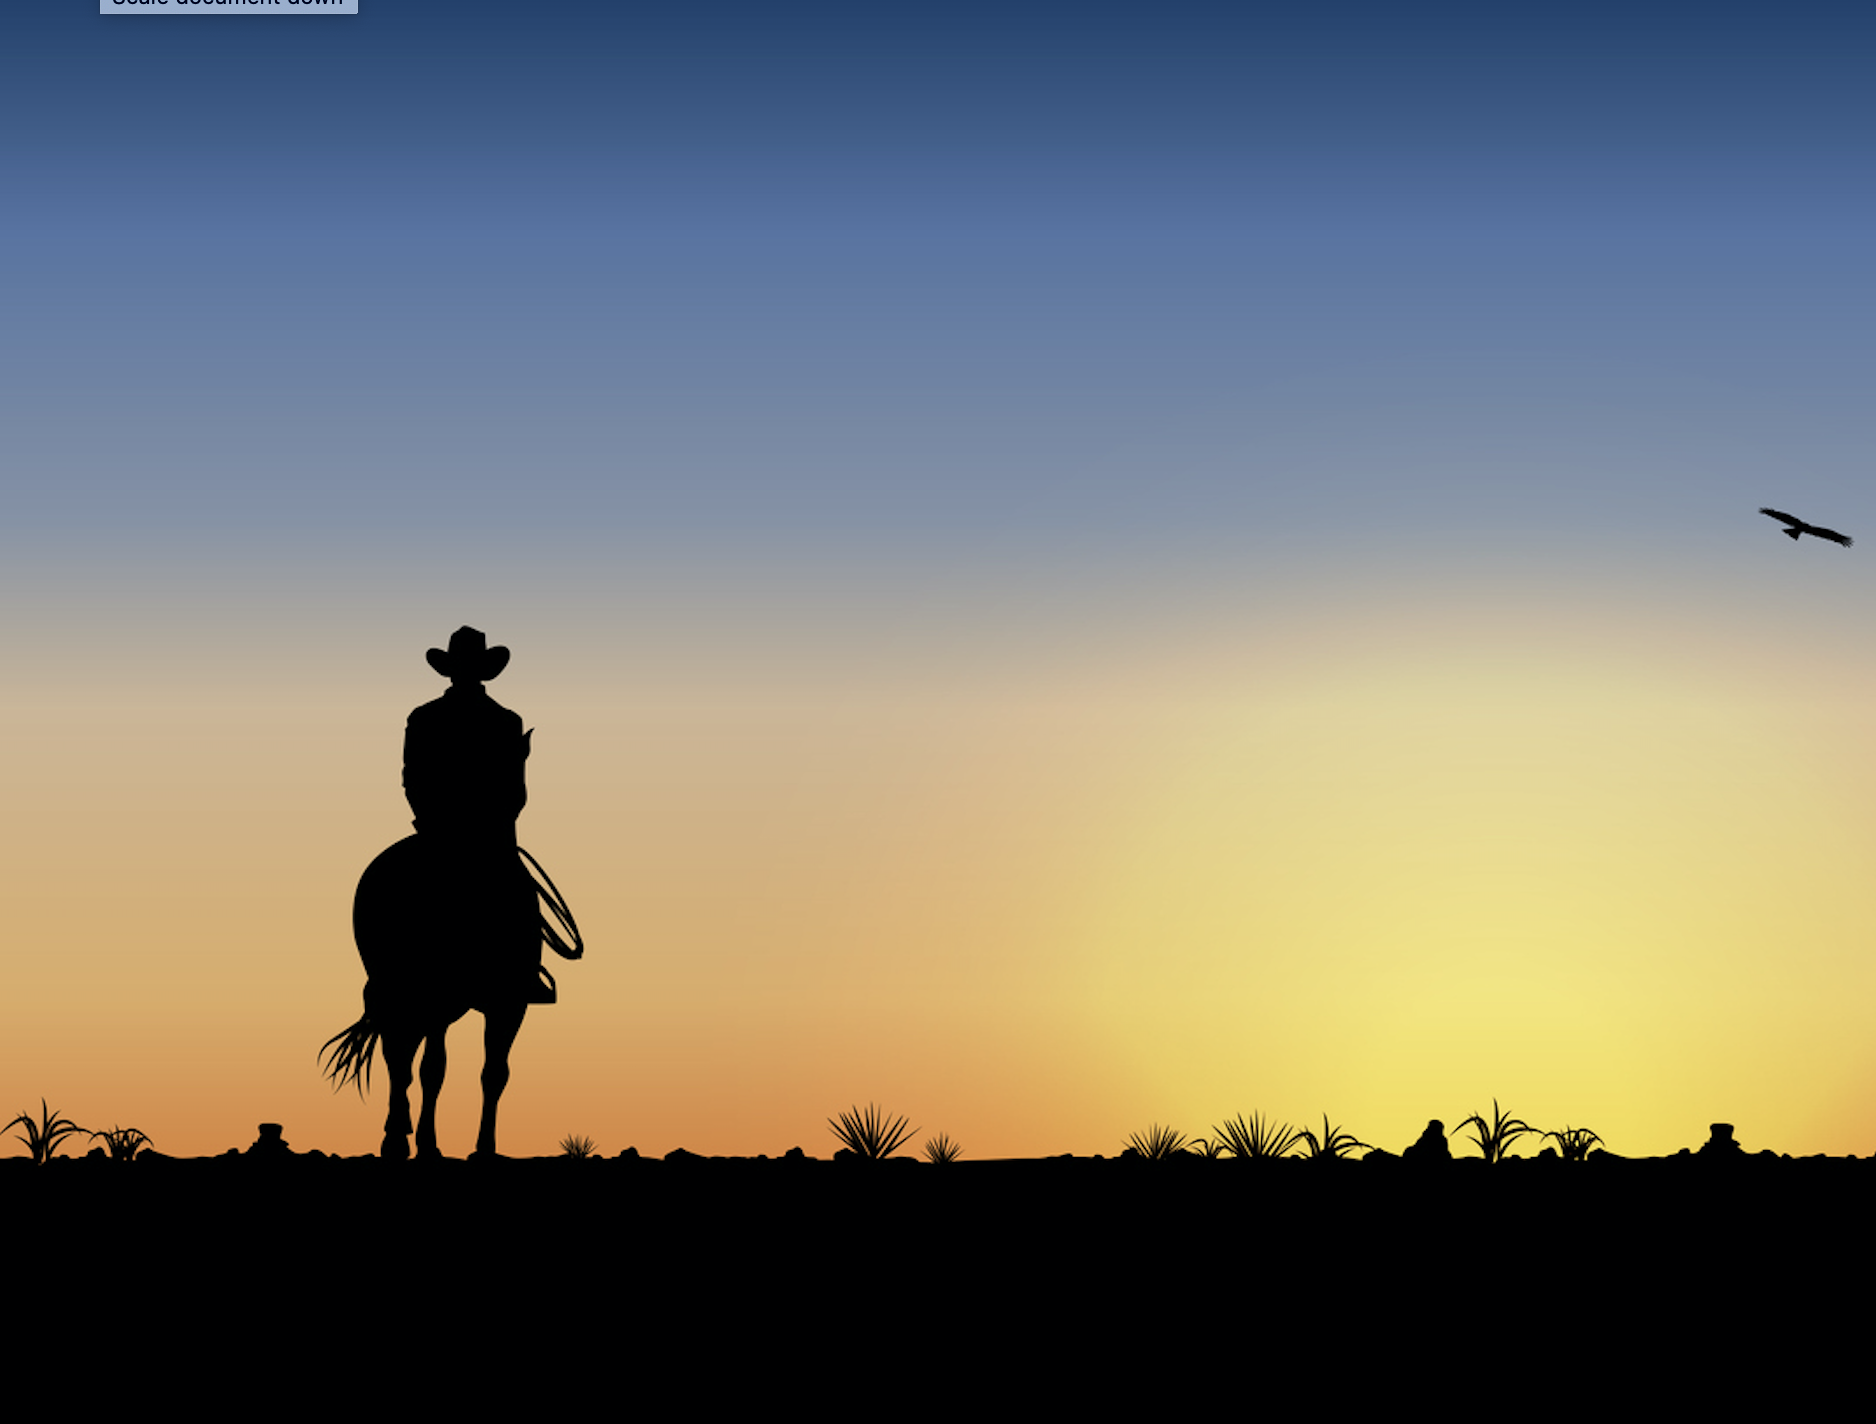 Cover image for  article: Riding Off into the Sunrise, Yes the Sunrise!